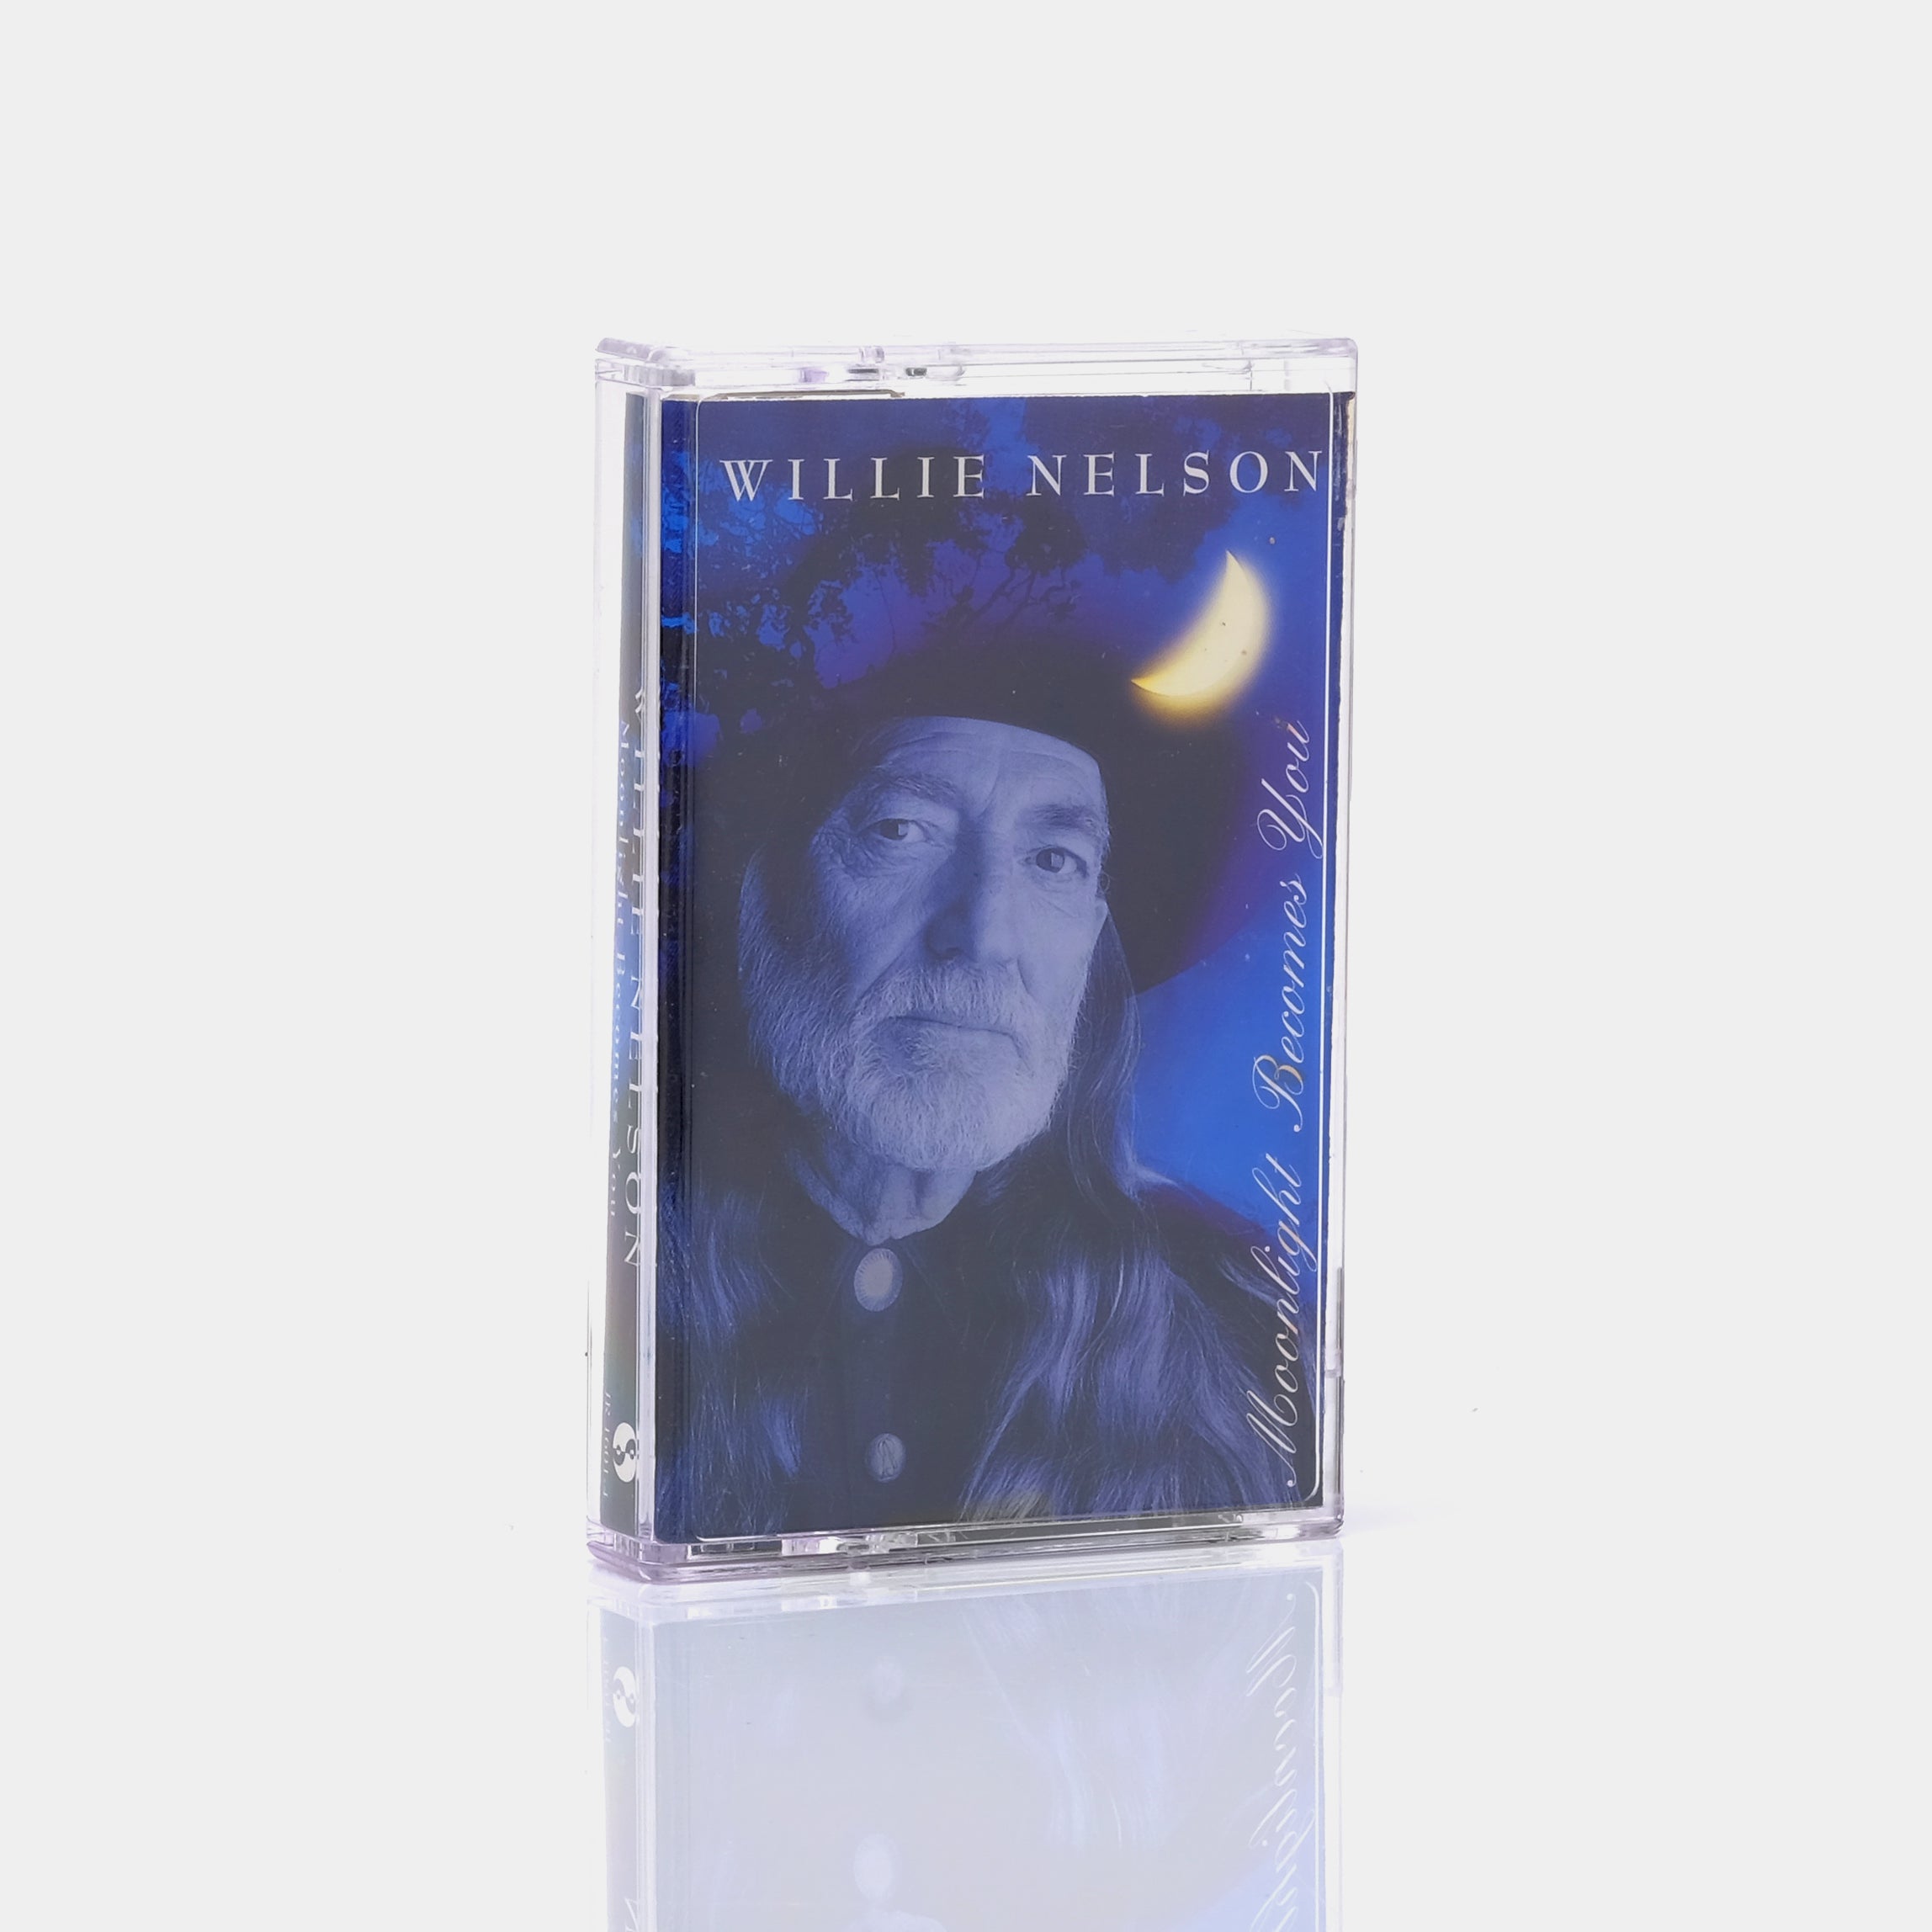 Willie Nelson - Moonlight Becomes You Cassette Tape